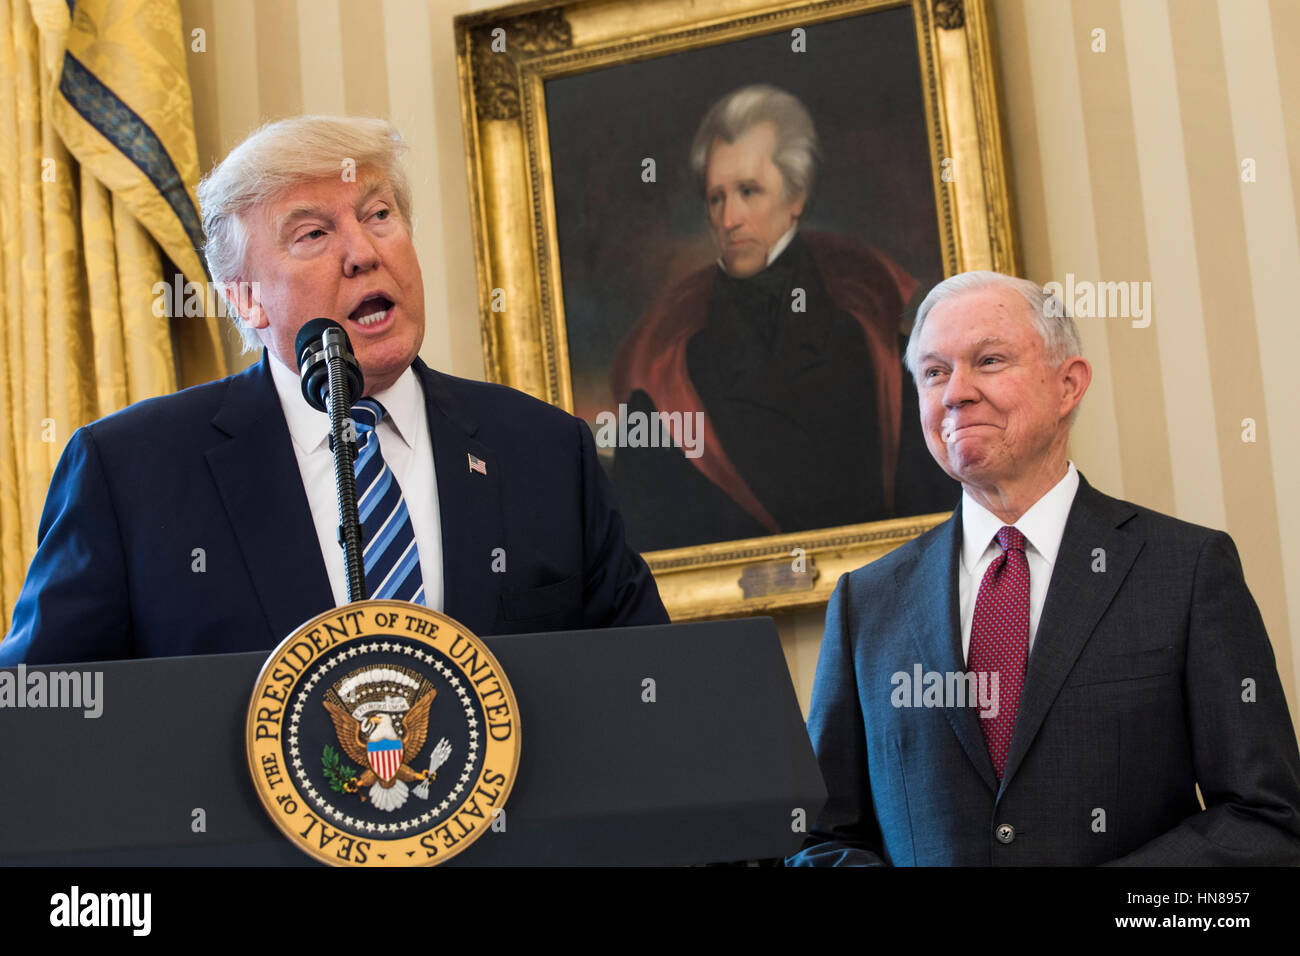 Attorney General Jeff Sessions (R) listens to U.S. President Donald J. Trump (L) speak before Vice President Mike Pence swore Sessions in as the next attorney general in the Oval Office of the White House in Washington, DC, USA, 09 February 2017. On 08 February, after a contentious battle on party lines, the Senate voted to confirm Sessions as attorney general. Credit: Jim LoScalzo/Pool via CNP /MediaPunch Stock Photo